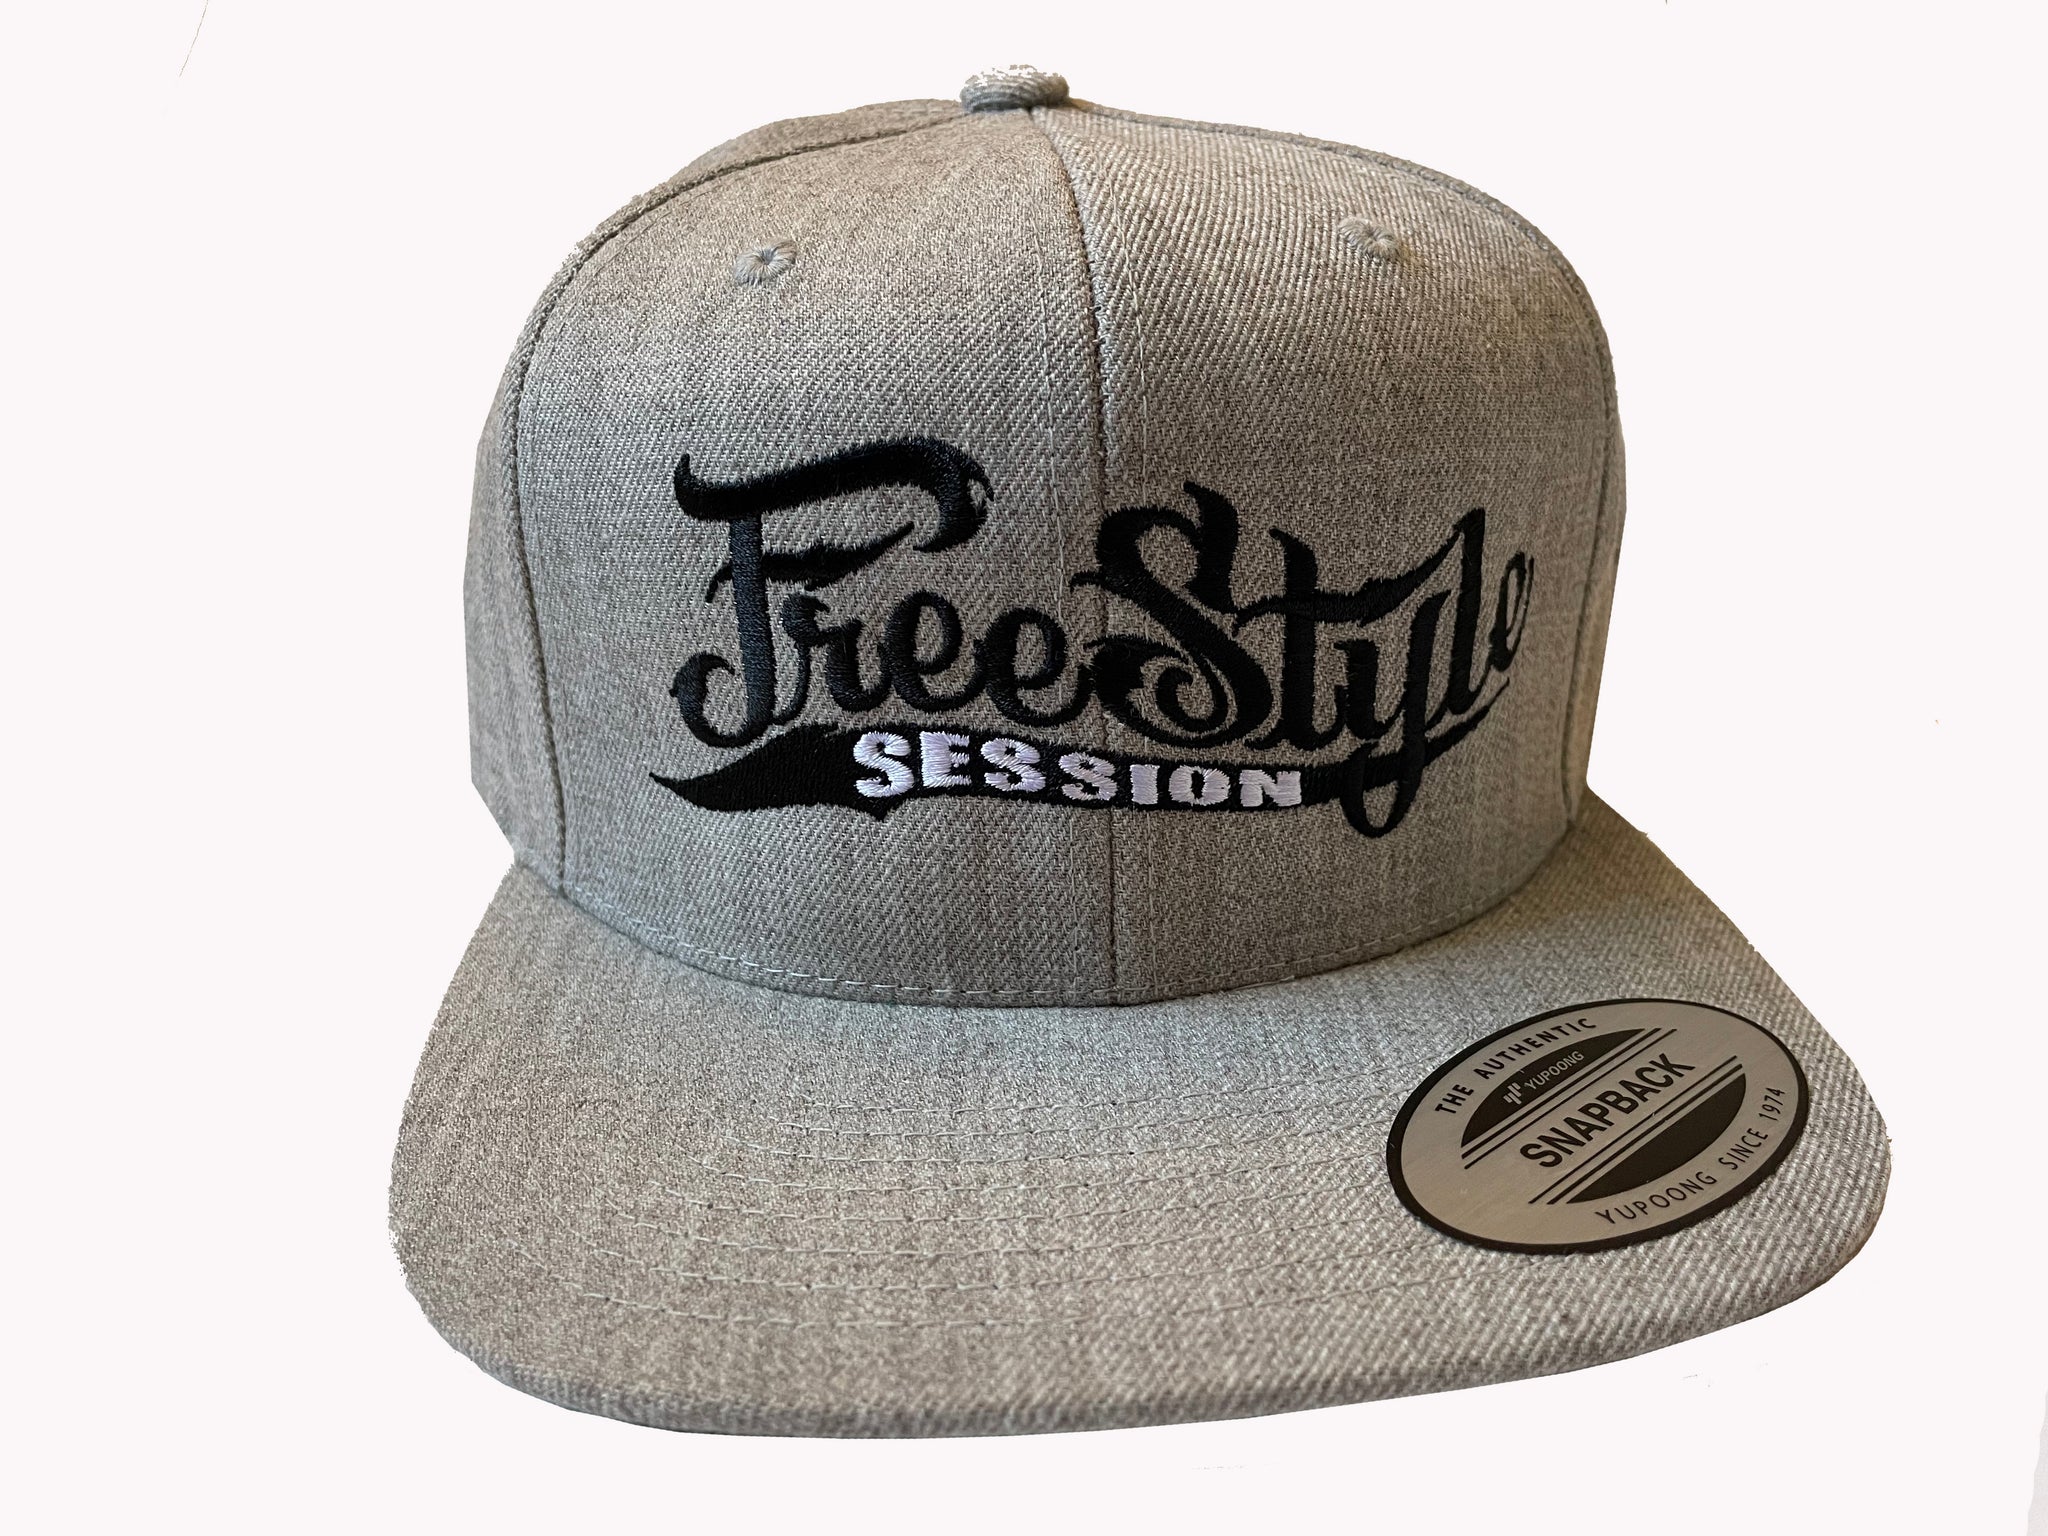 Freestyle Session Hat - Heather Grey